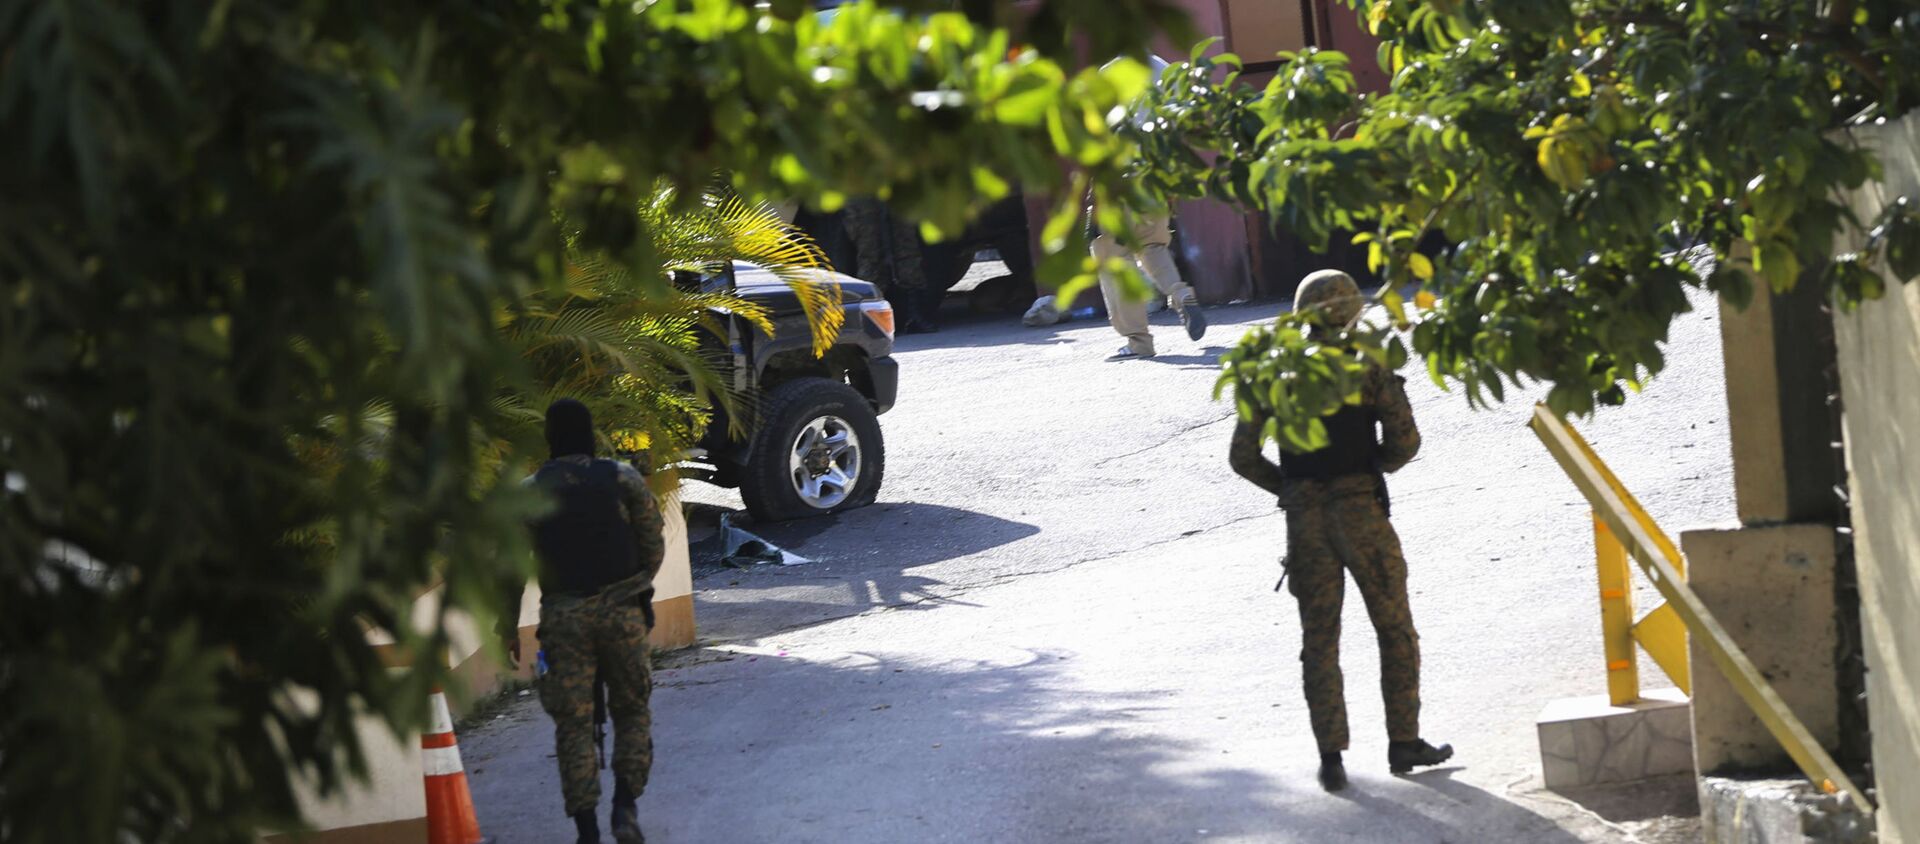 Soldiers stand guard at the entrance to the house of late Haitian President Jovenel Moise in Port-au-Prince, Haiti, Wednesday, July 7, 2021. Moïse was assassinated in an attack on his private residence early Wednesday, and first lady Martine Moïse was shot in the overnight attack and hospitalized, according to a statement from the country’s interim prime minister. (AP Photo/Joseph Odelyn) - 俄罗斯卫星通讯社, 1920, 09.07.2021